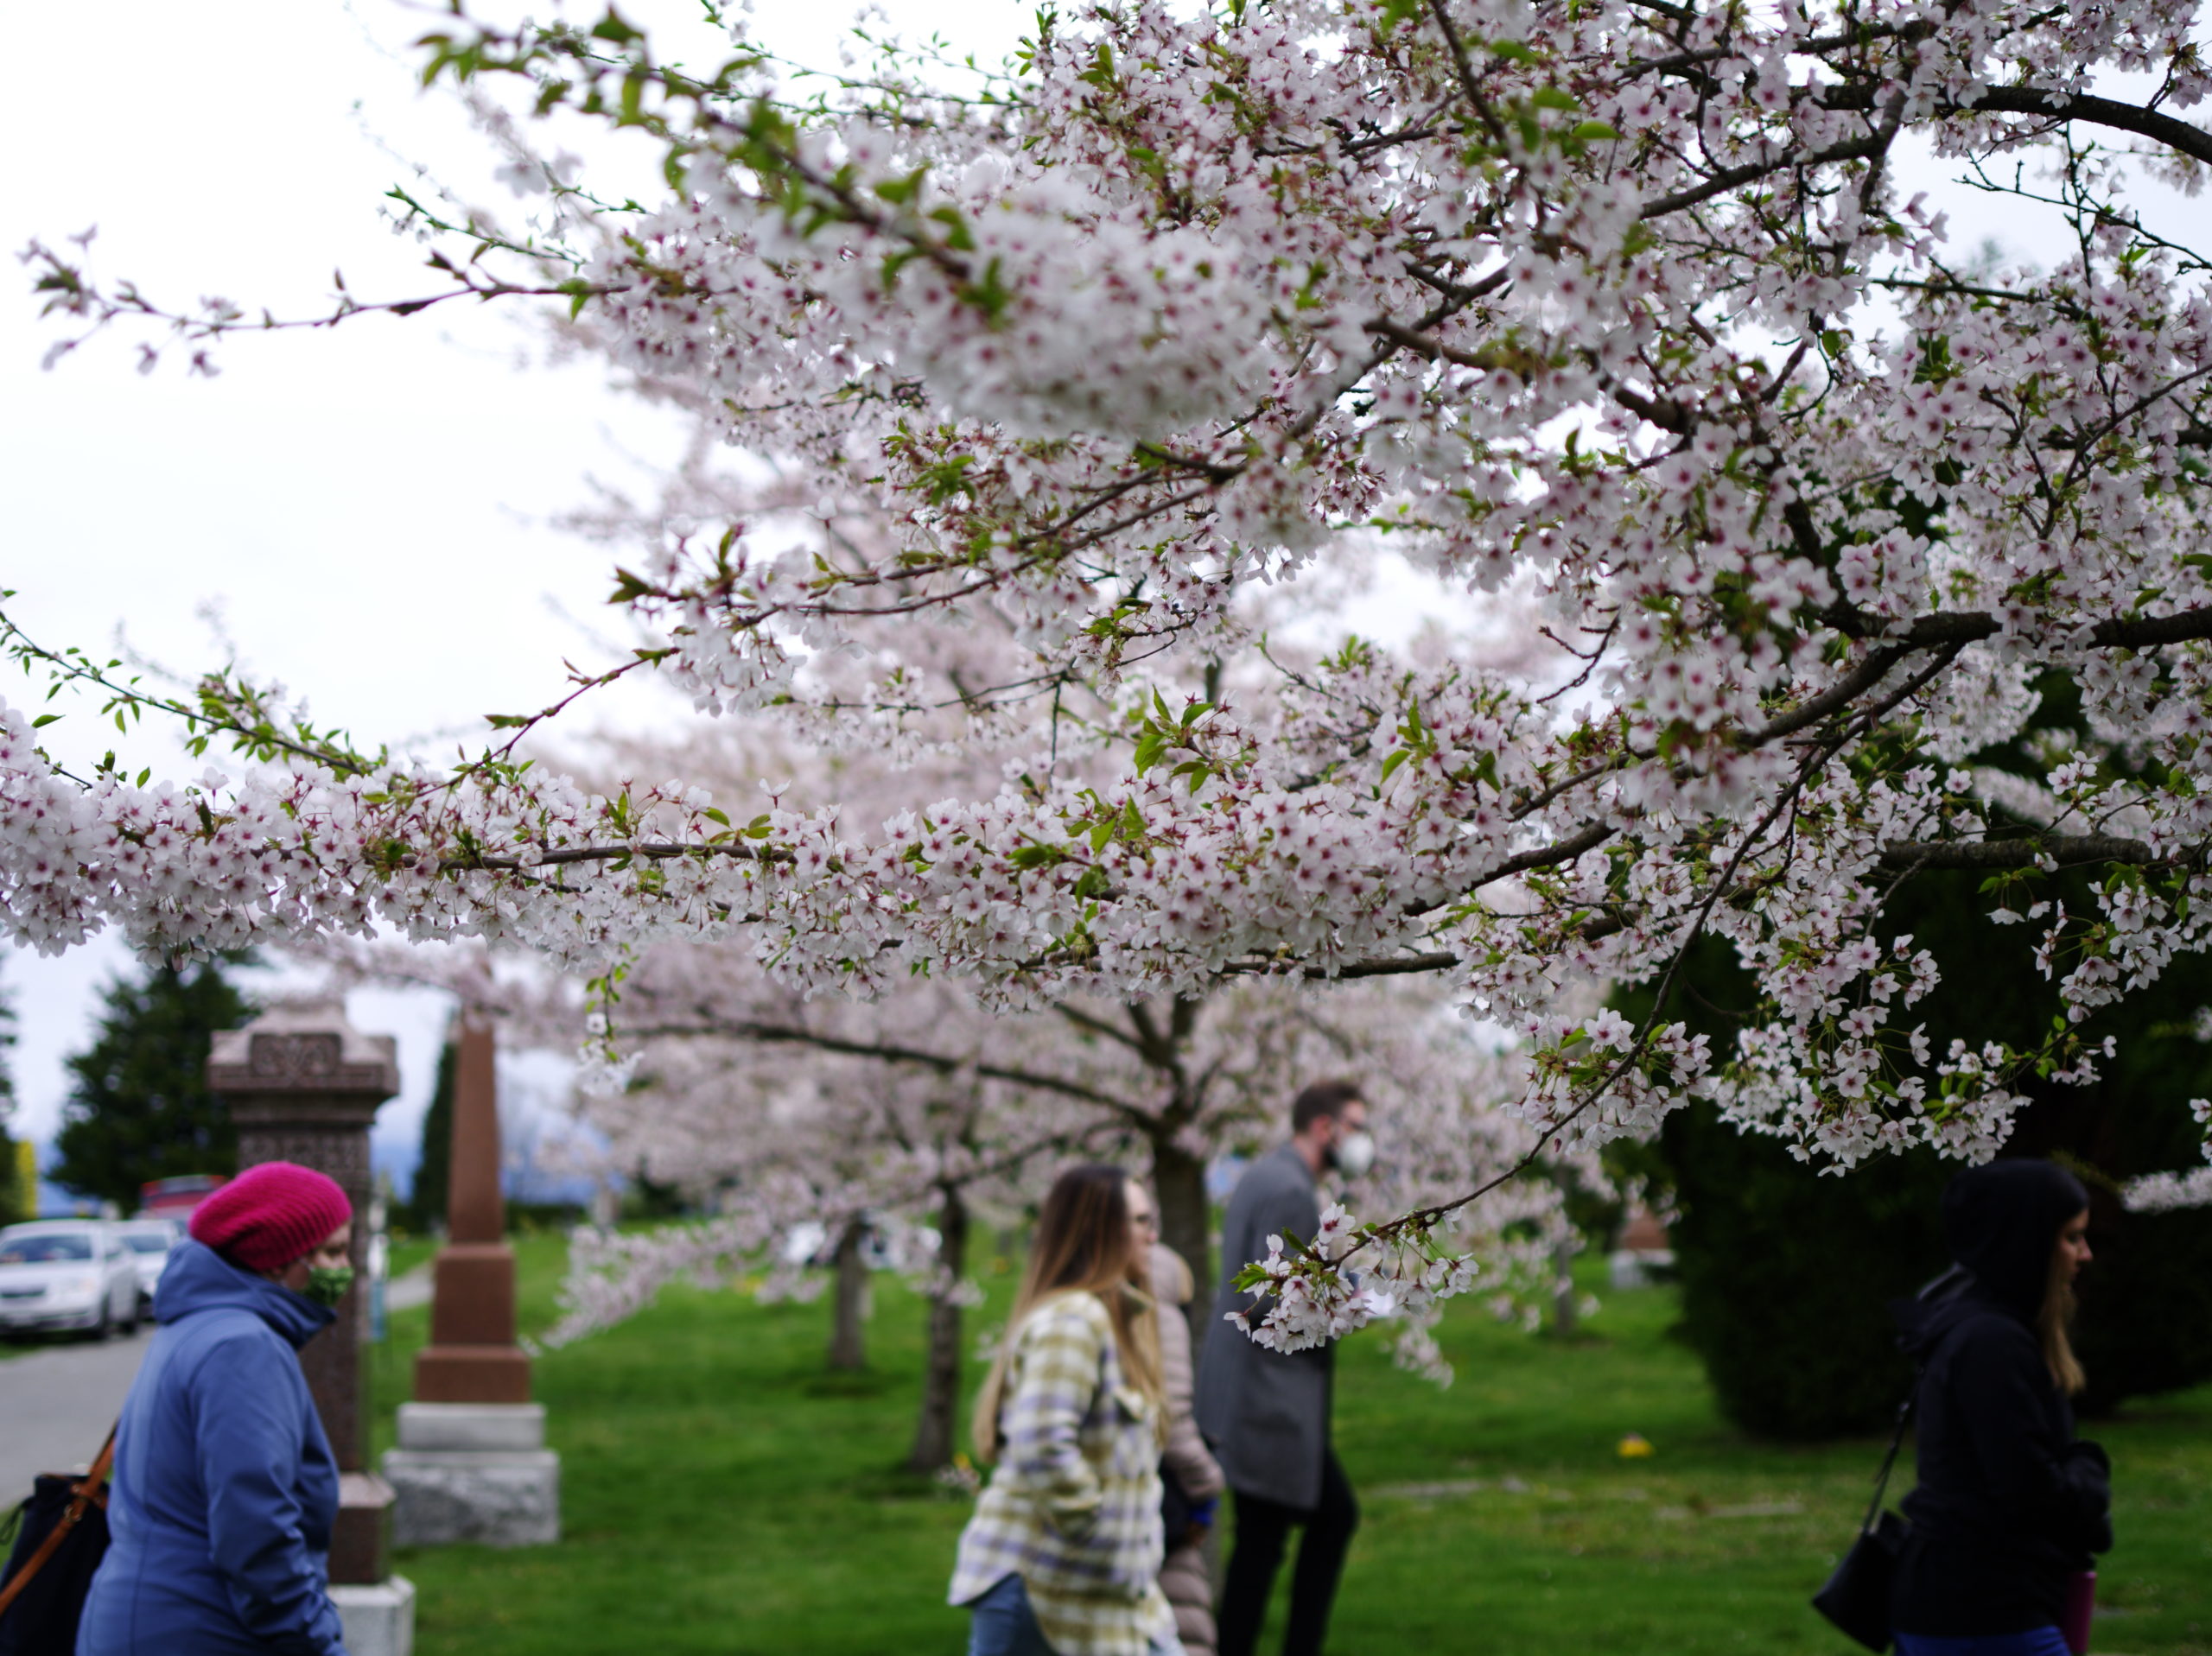 Image Description: Branches of a cherry blossom tree in bloom extend from the right side of the photograph to the left. Small green leaves sprout out from between the small light pink blooms with dark pink centres. Five people at the bottom of the photograph are traveling through Mountain View cemetery, walking towards the right side of the photograph. They all have their hands in their pockets. Their faces are serious and reflective.